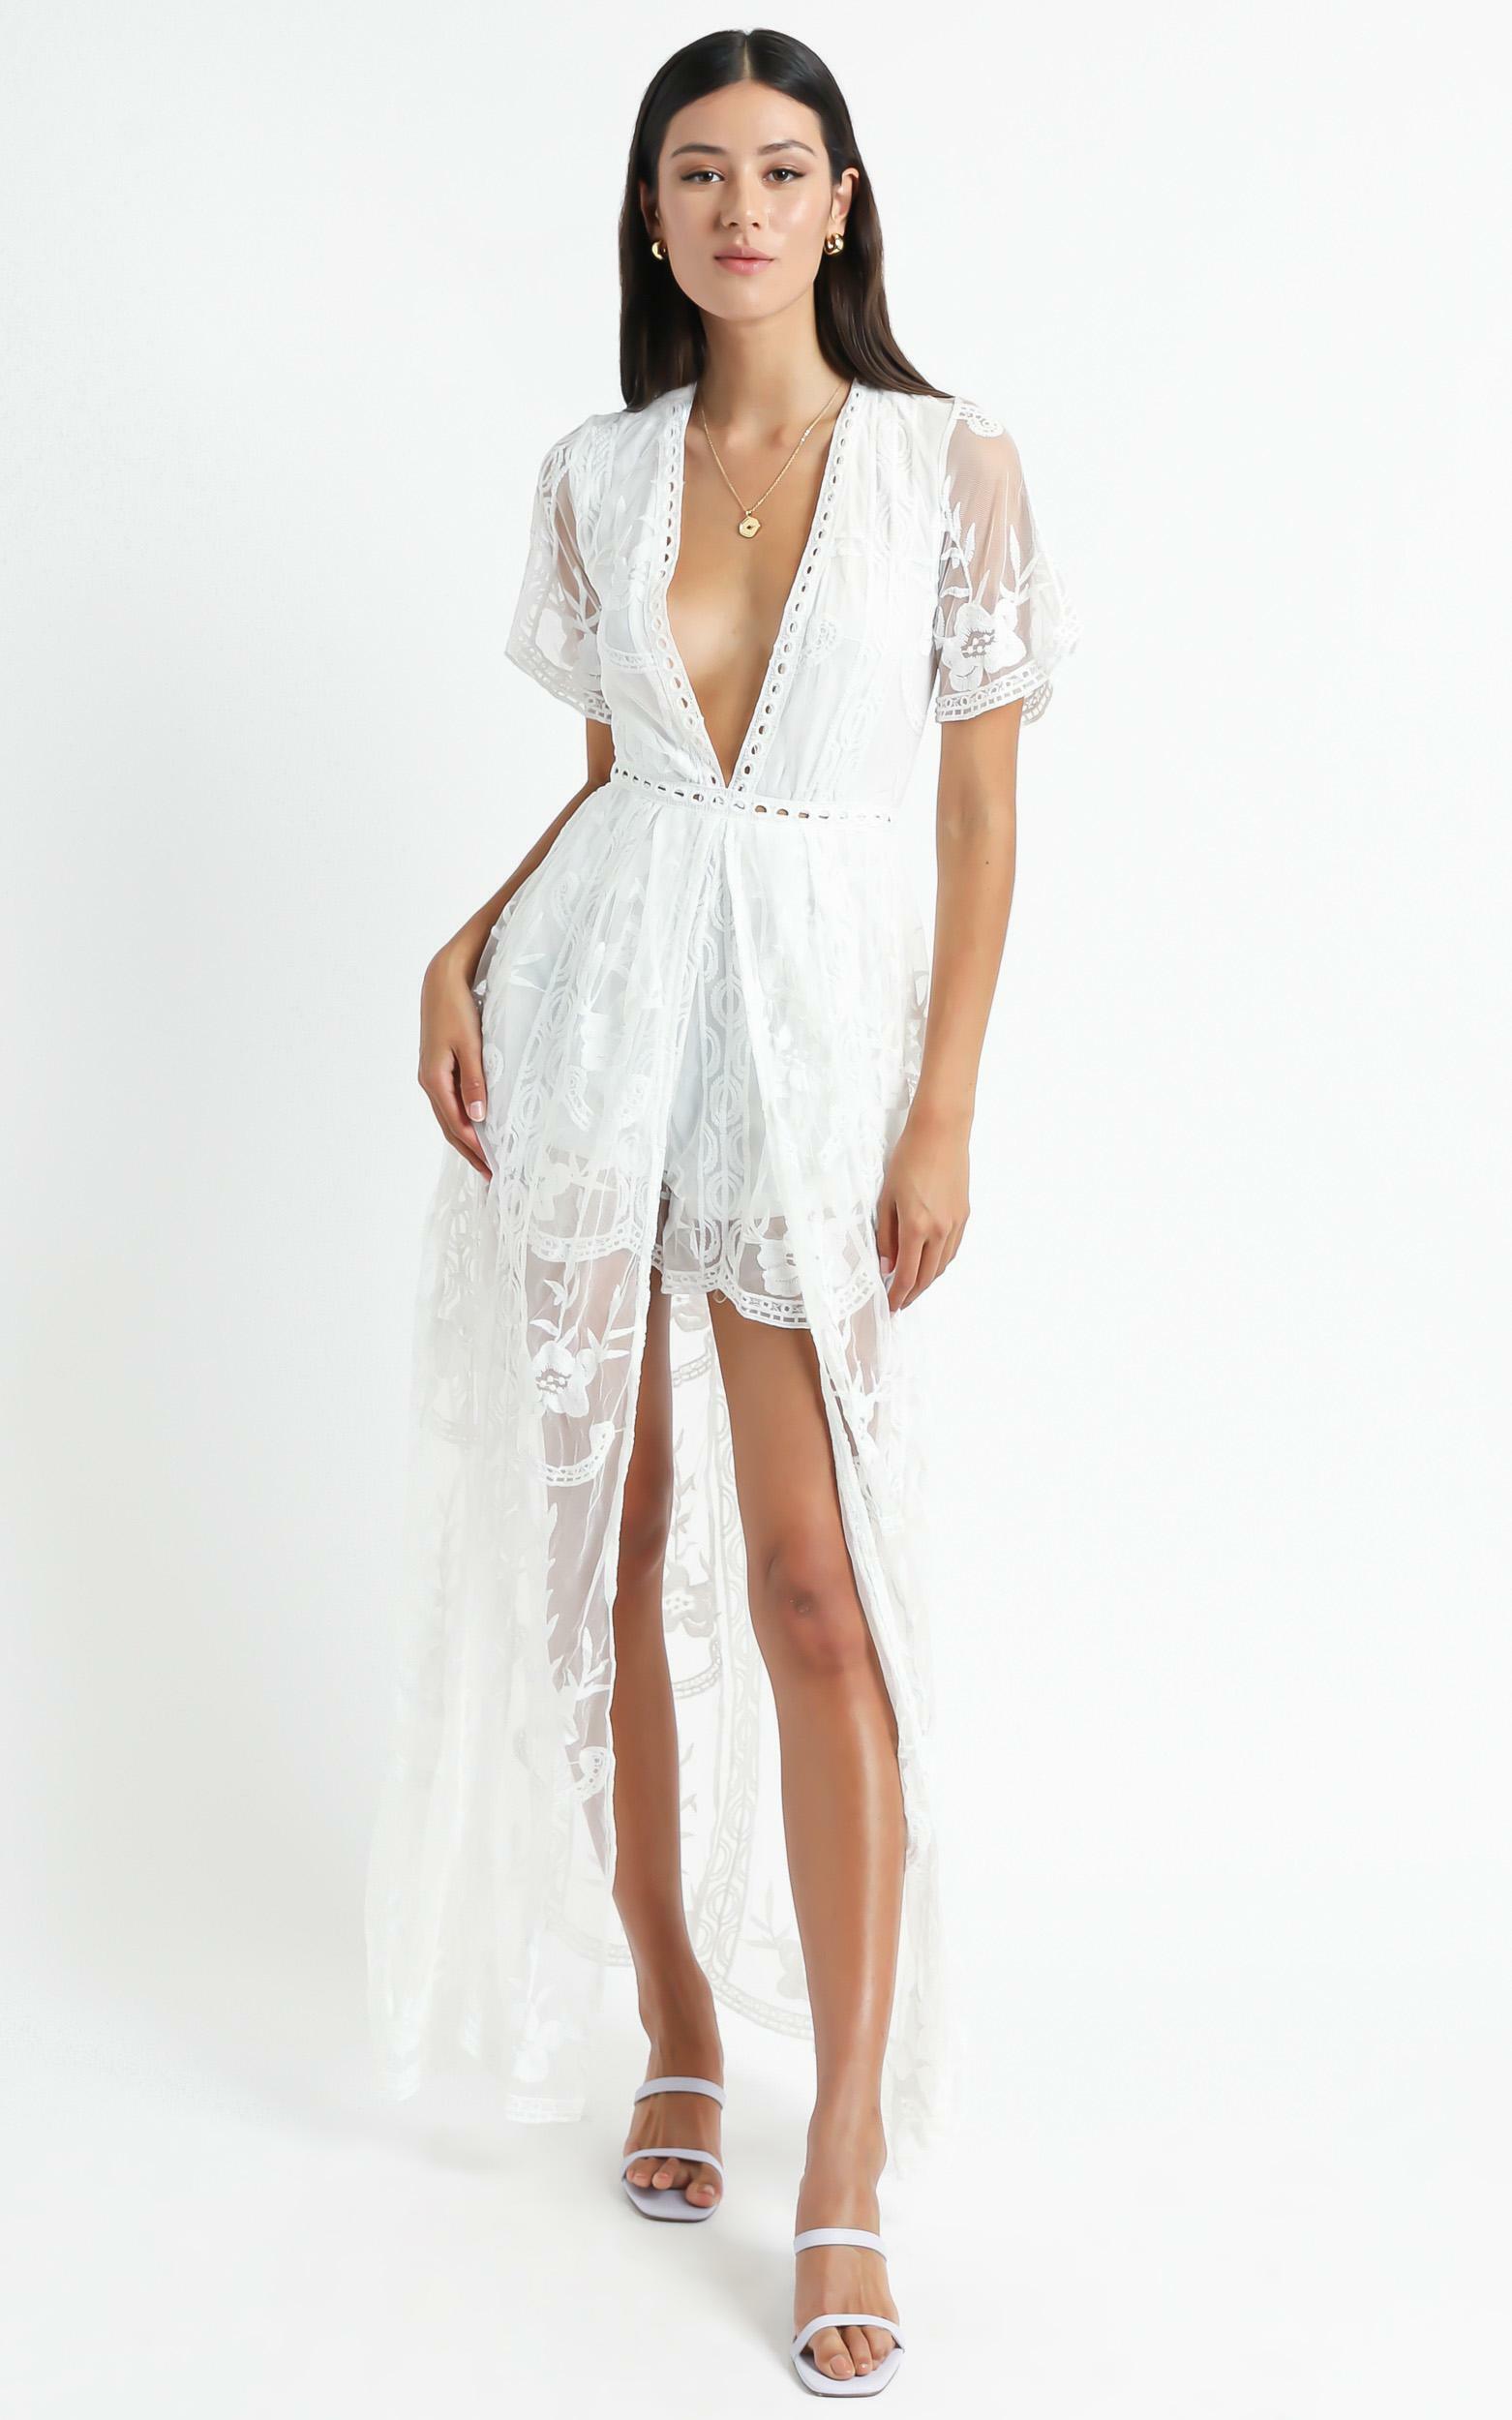 Lets Get Loud Maxi Playsuit in White Lace - 06, WHT4, hi-res image number null